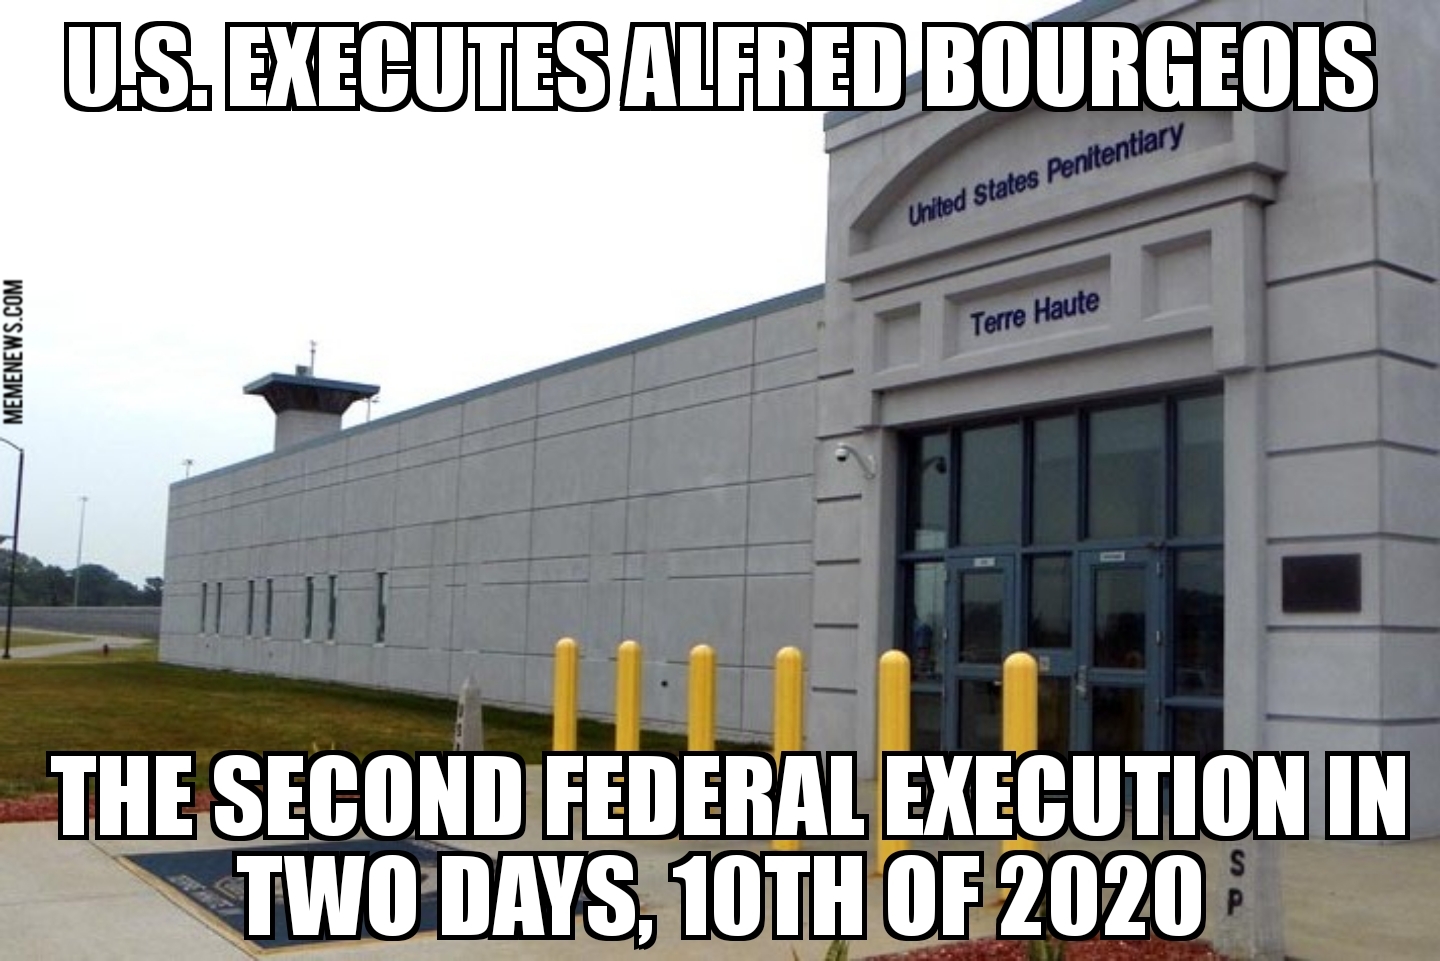 Tenth federal execution of 2020